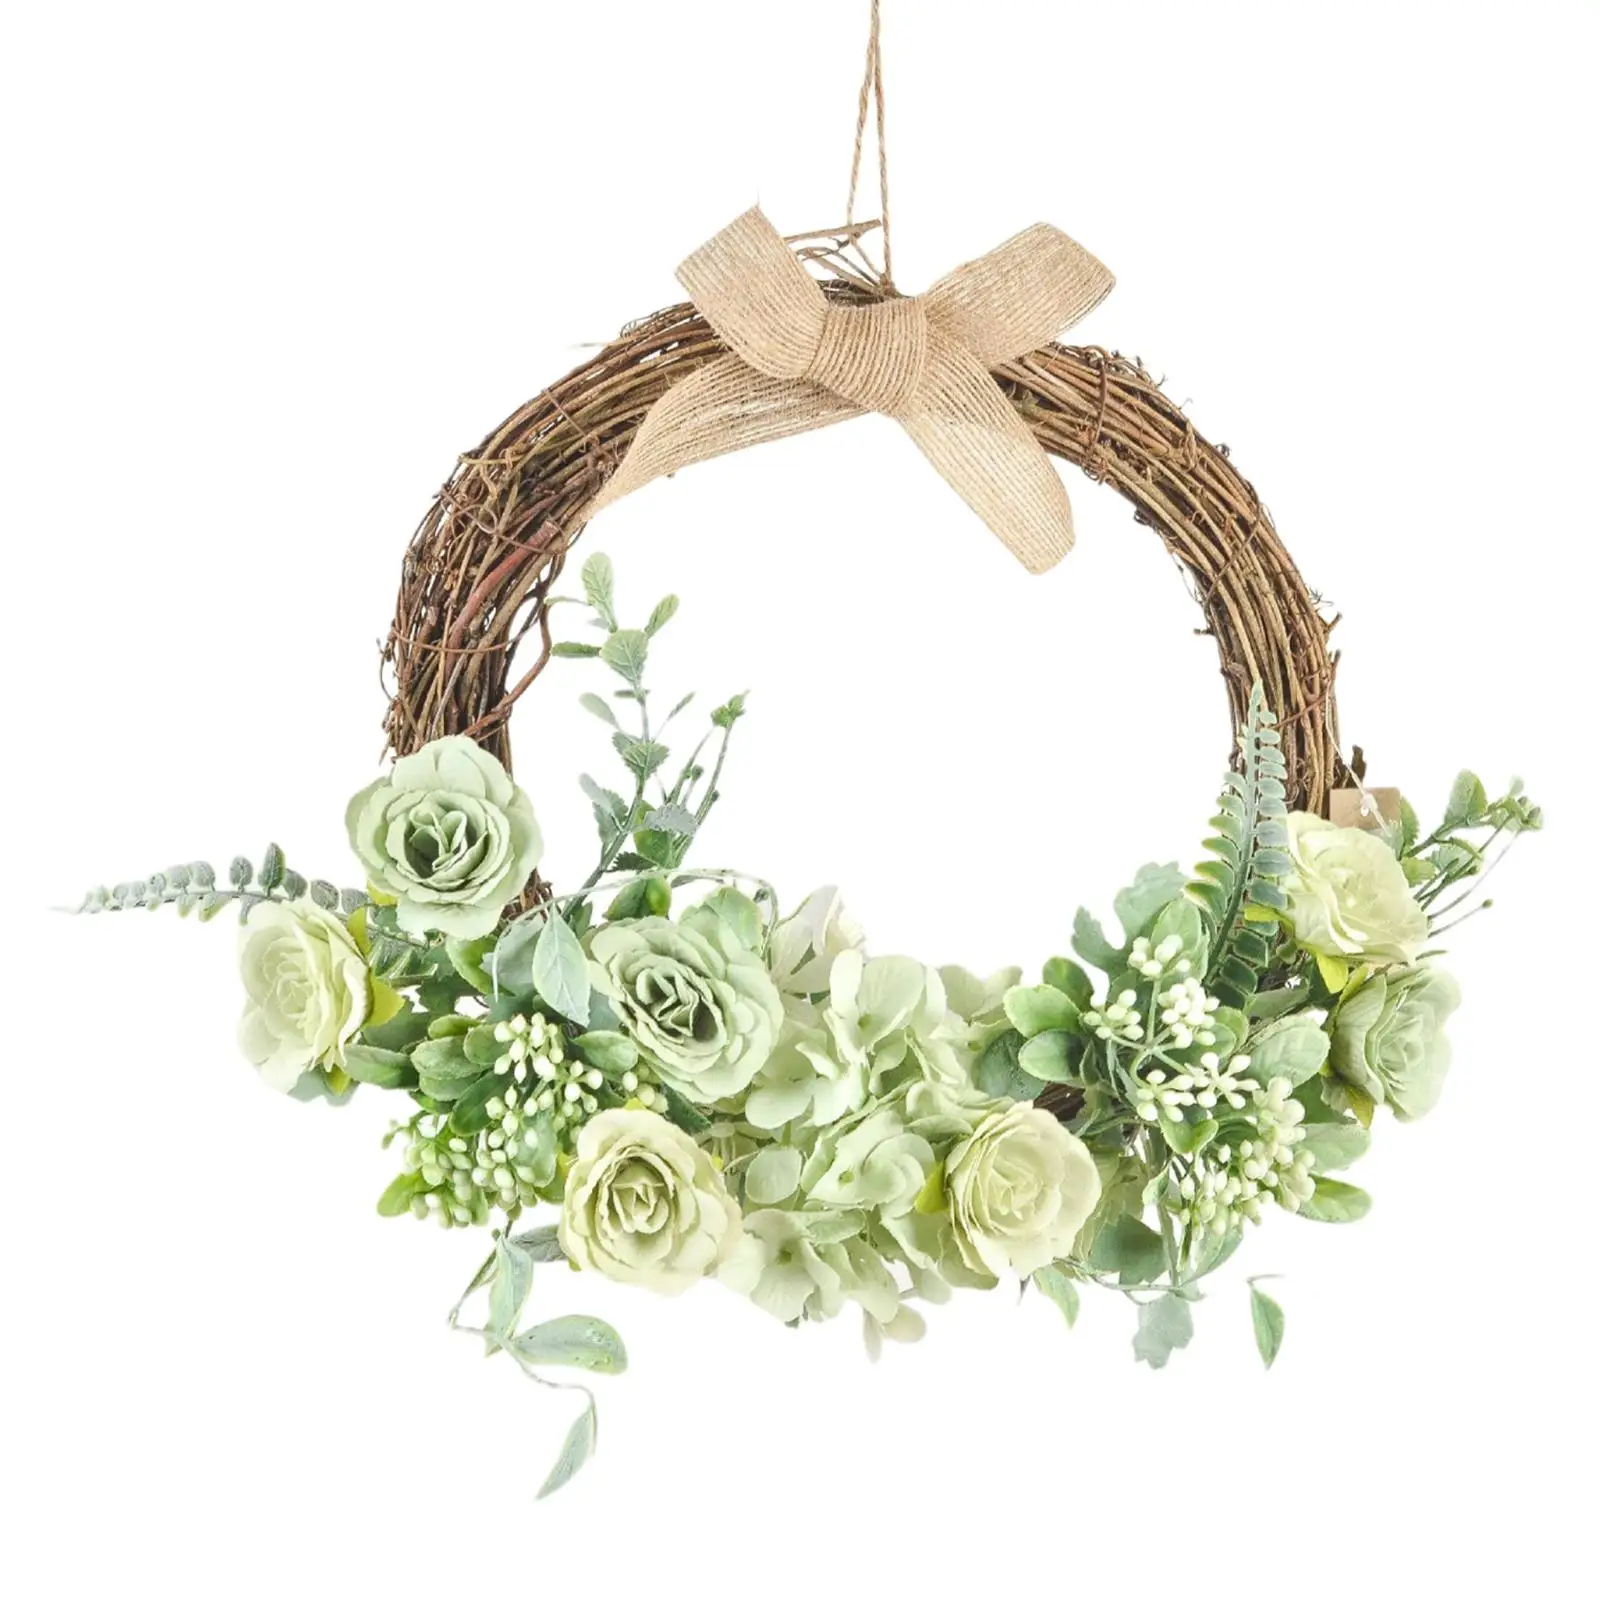 Simulation 13inch Artificial Flower Wreath Front Door Greenery Hanging Garland Outdoor Wedding Party Ornament Home Decoration